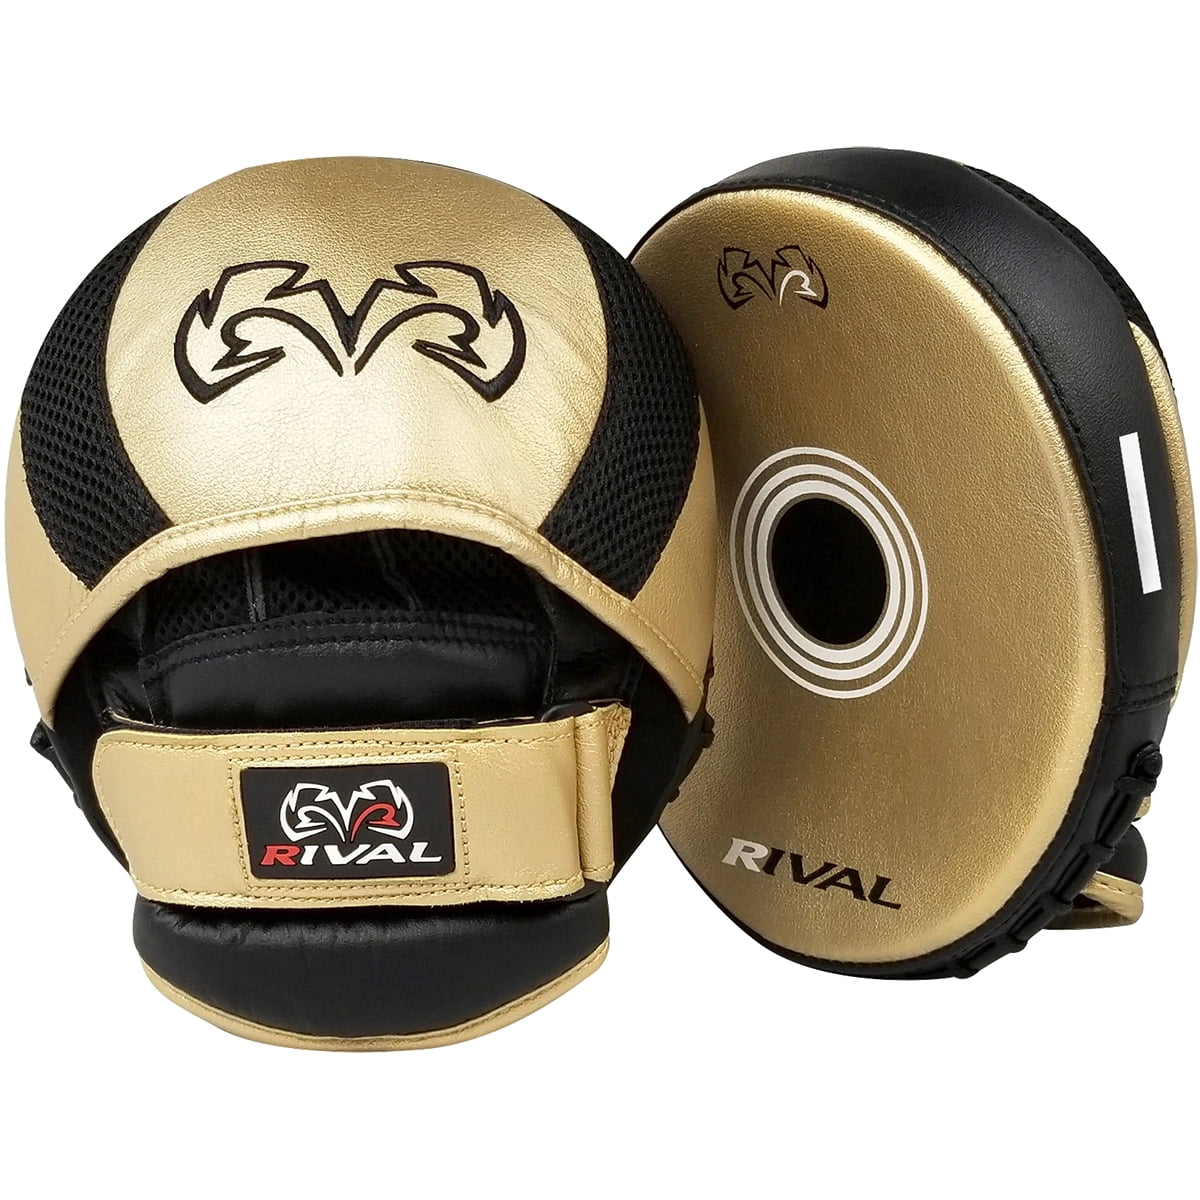 Rival Pro Boxing Focus Mitts  RPM11 Evolution Punch Mitts 